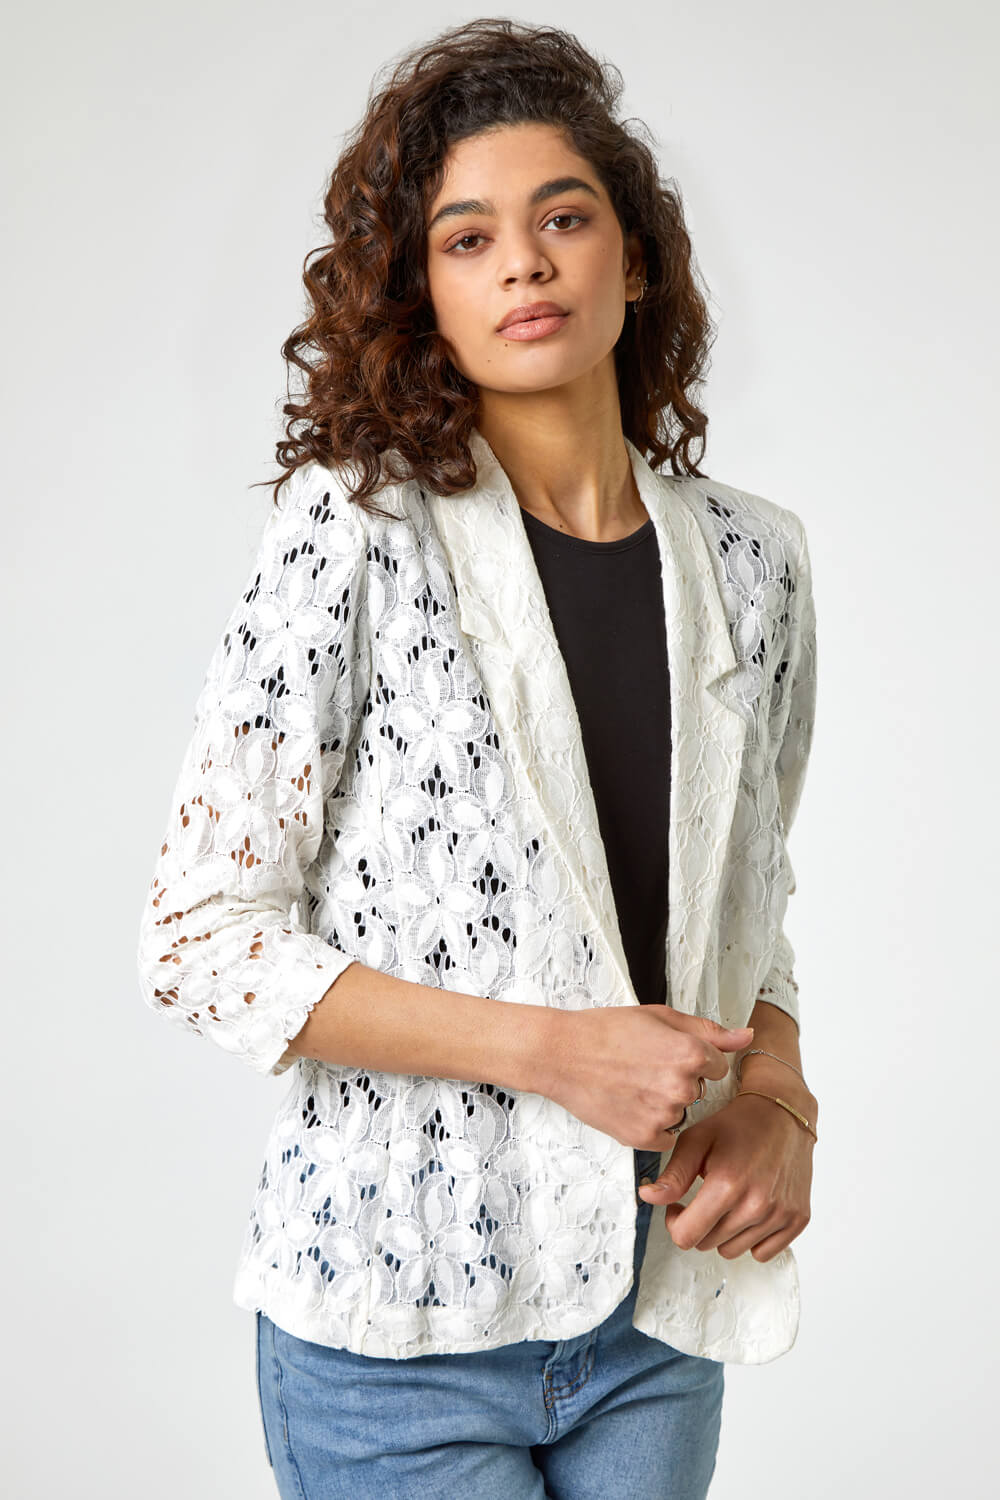 Roman Originals Floral Lace 3/4 Sleeve Jacket in Ivory